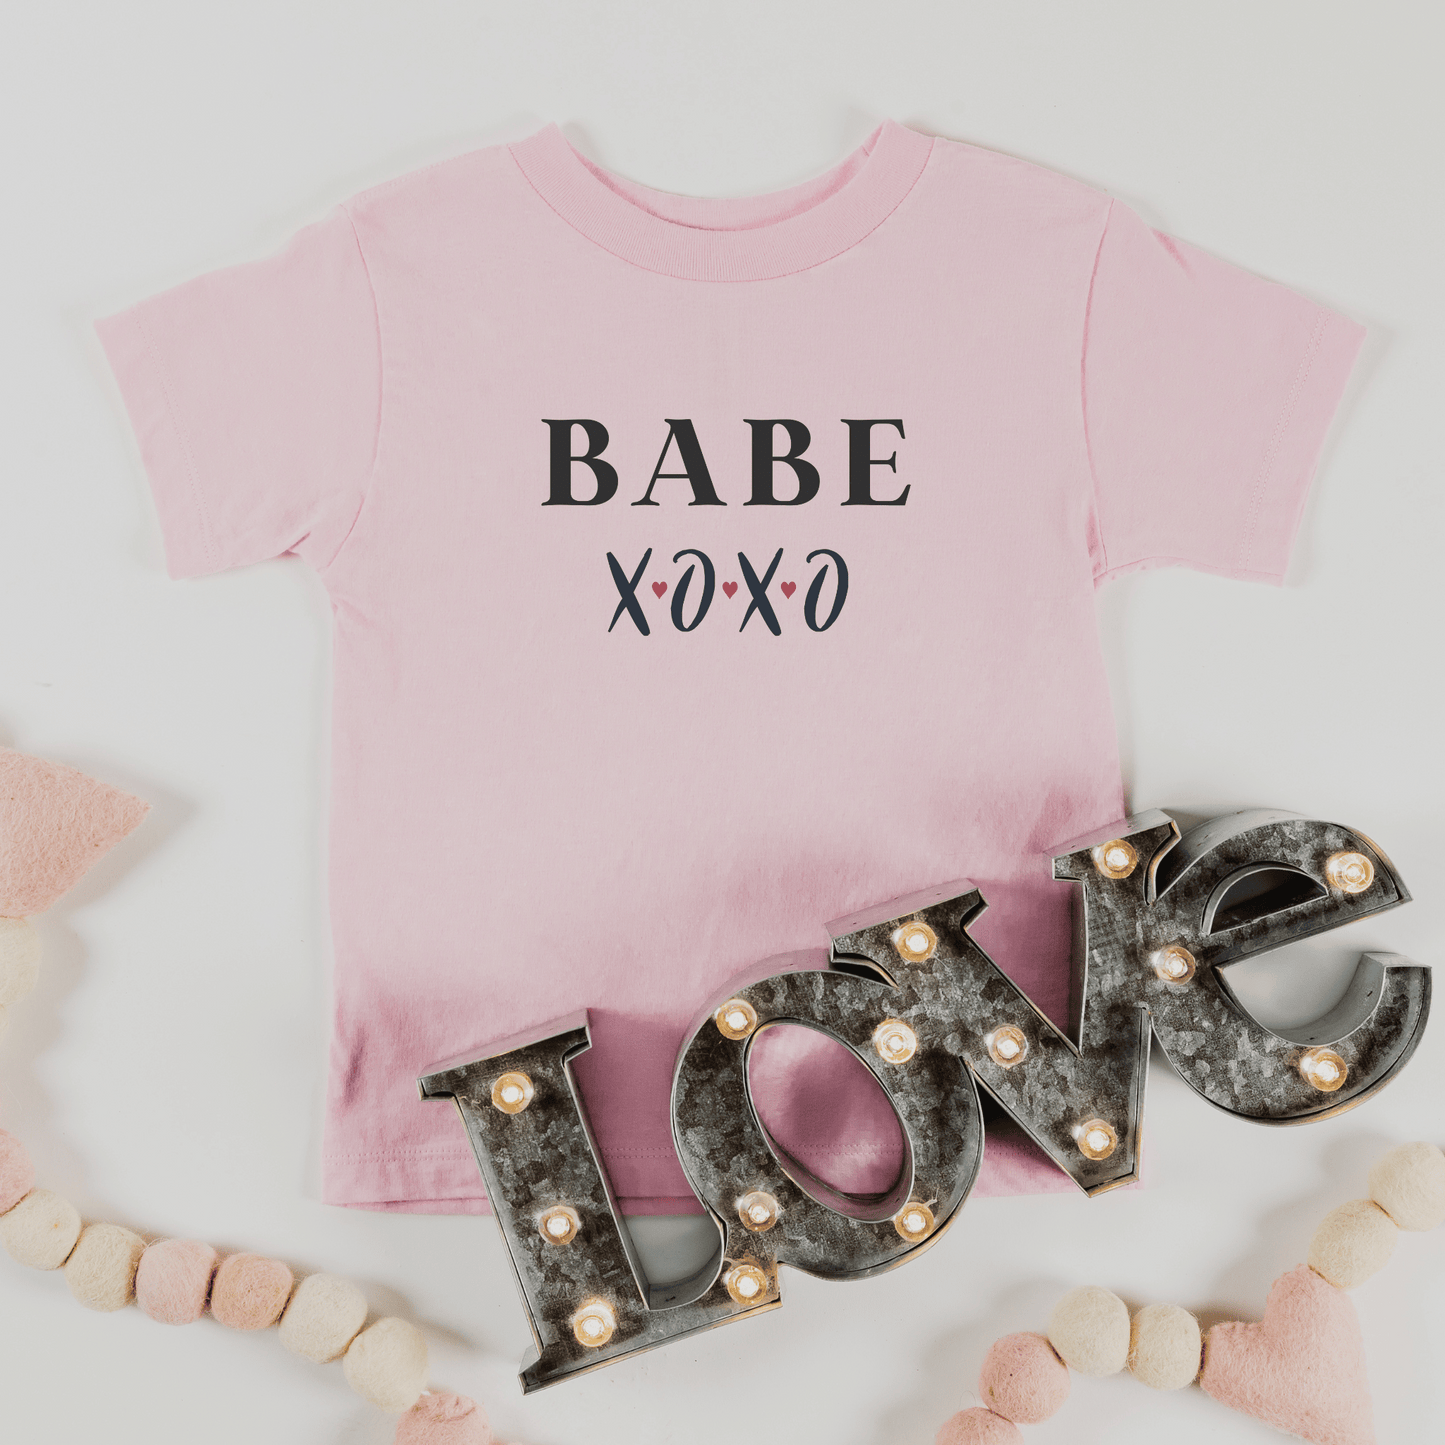 BABE xoxo Toddler Graphic Tee | 8 Colors